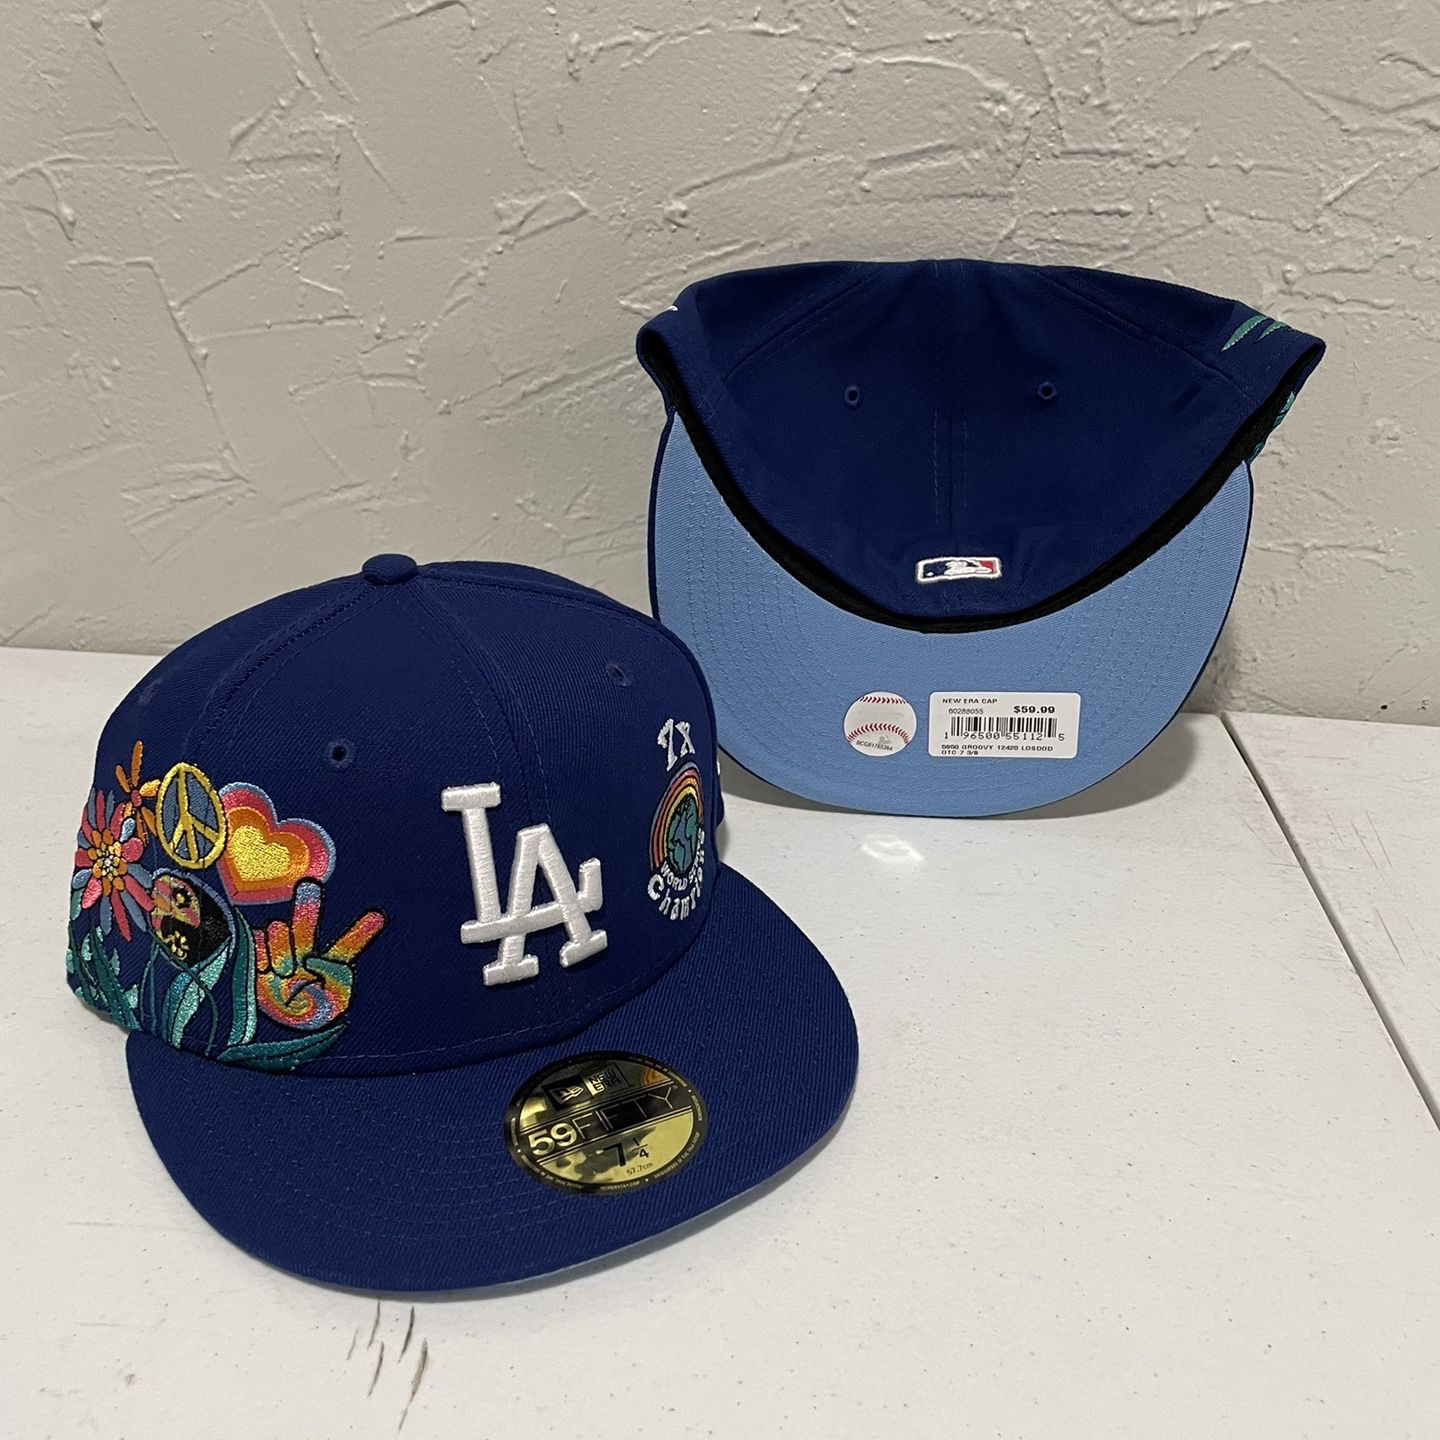 Los Angeles Dodgers Filipino Night special event game baseball hat for Sale  in Cerritos, CA - OfferUp